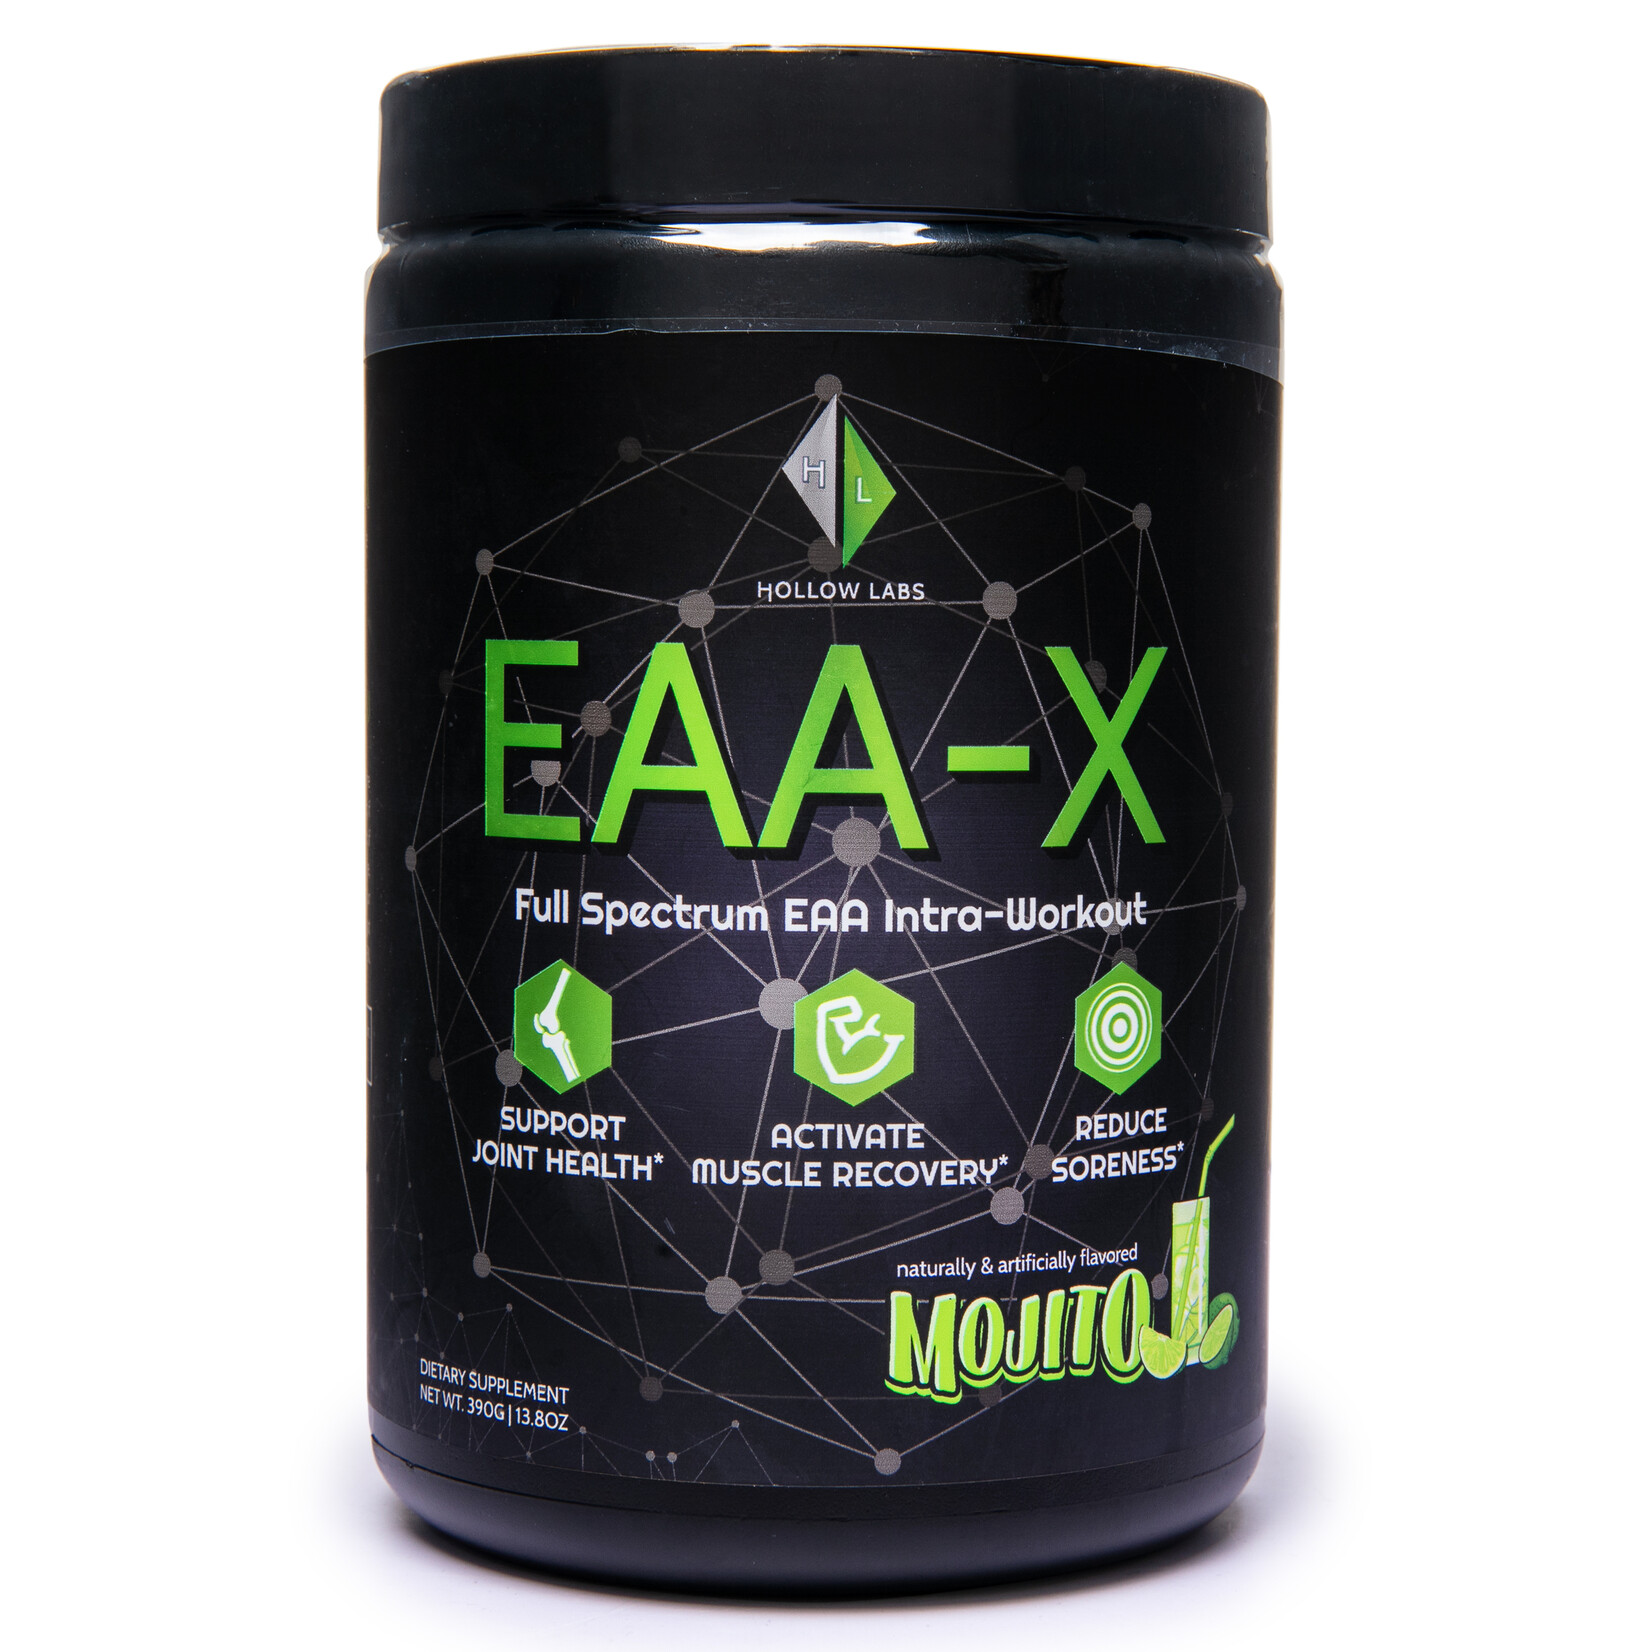 Hollow Labs EAA-X Full Spectrum EAA Intra-Workout